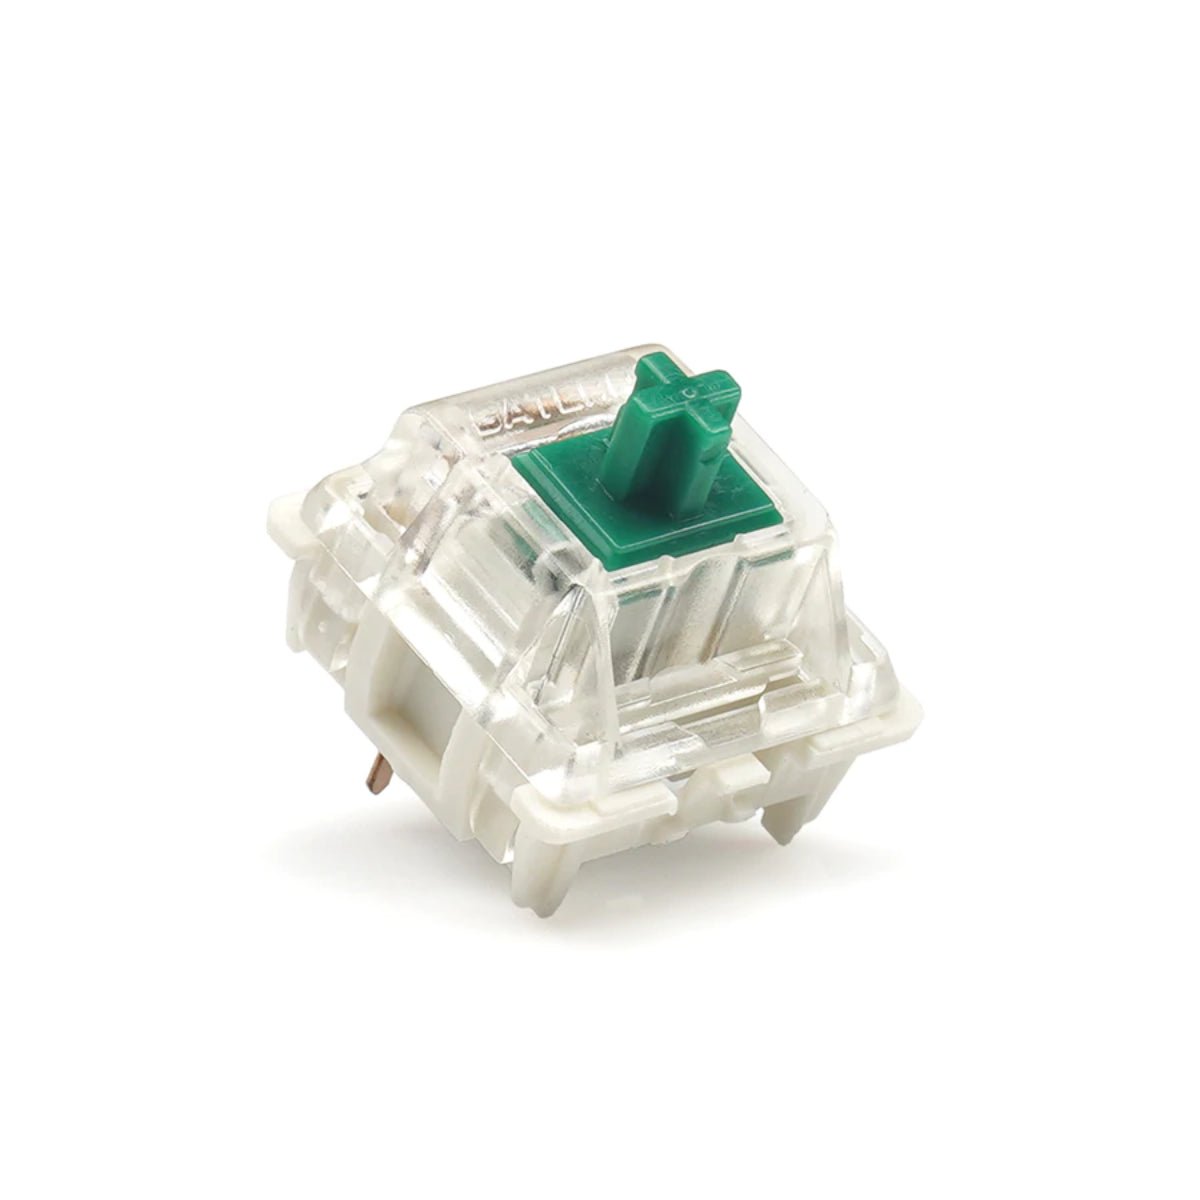 KBD Fans Gateron SMD Tactile Switches - Green - Store 974 | ستور ٩٧٤